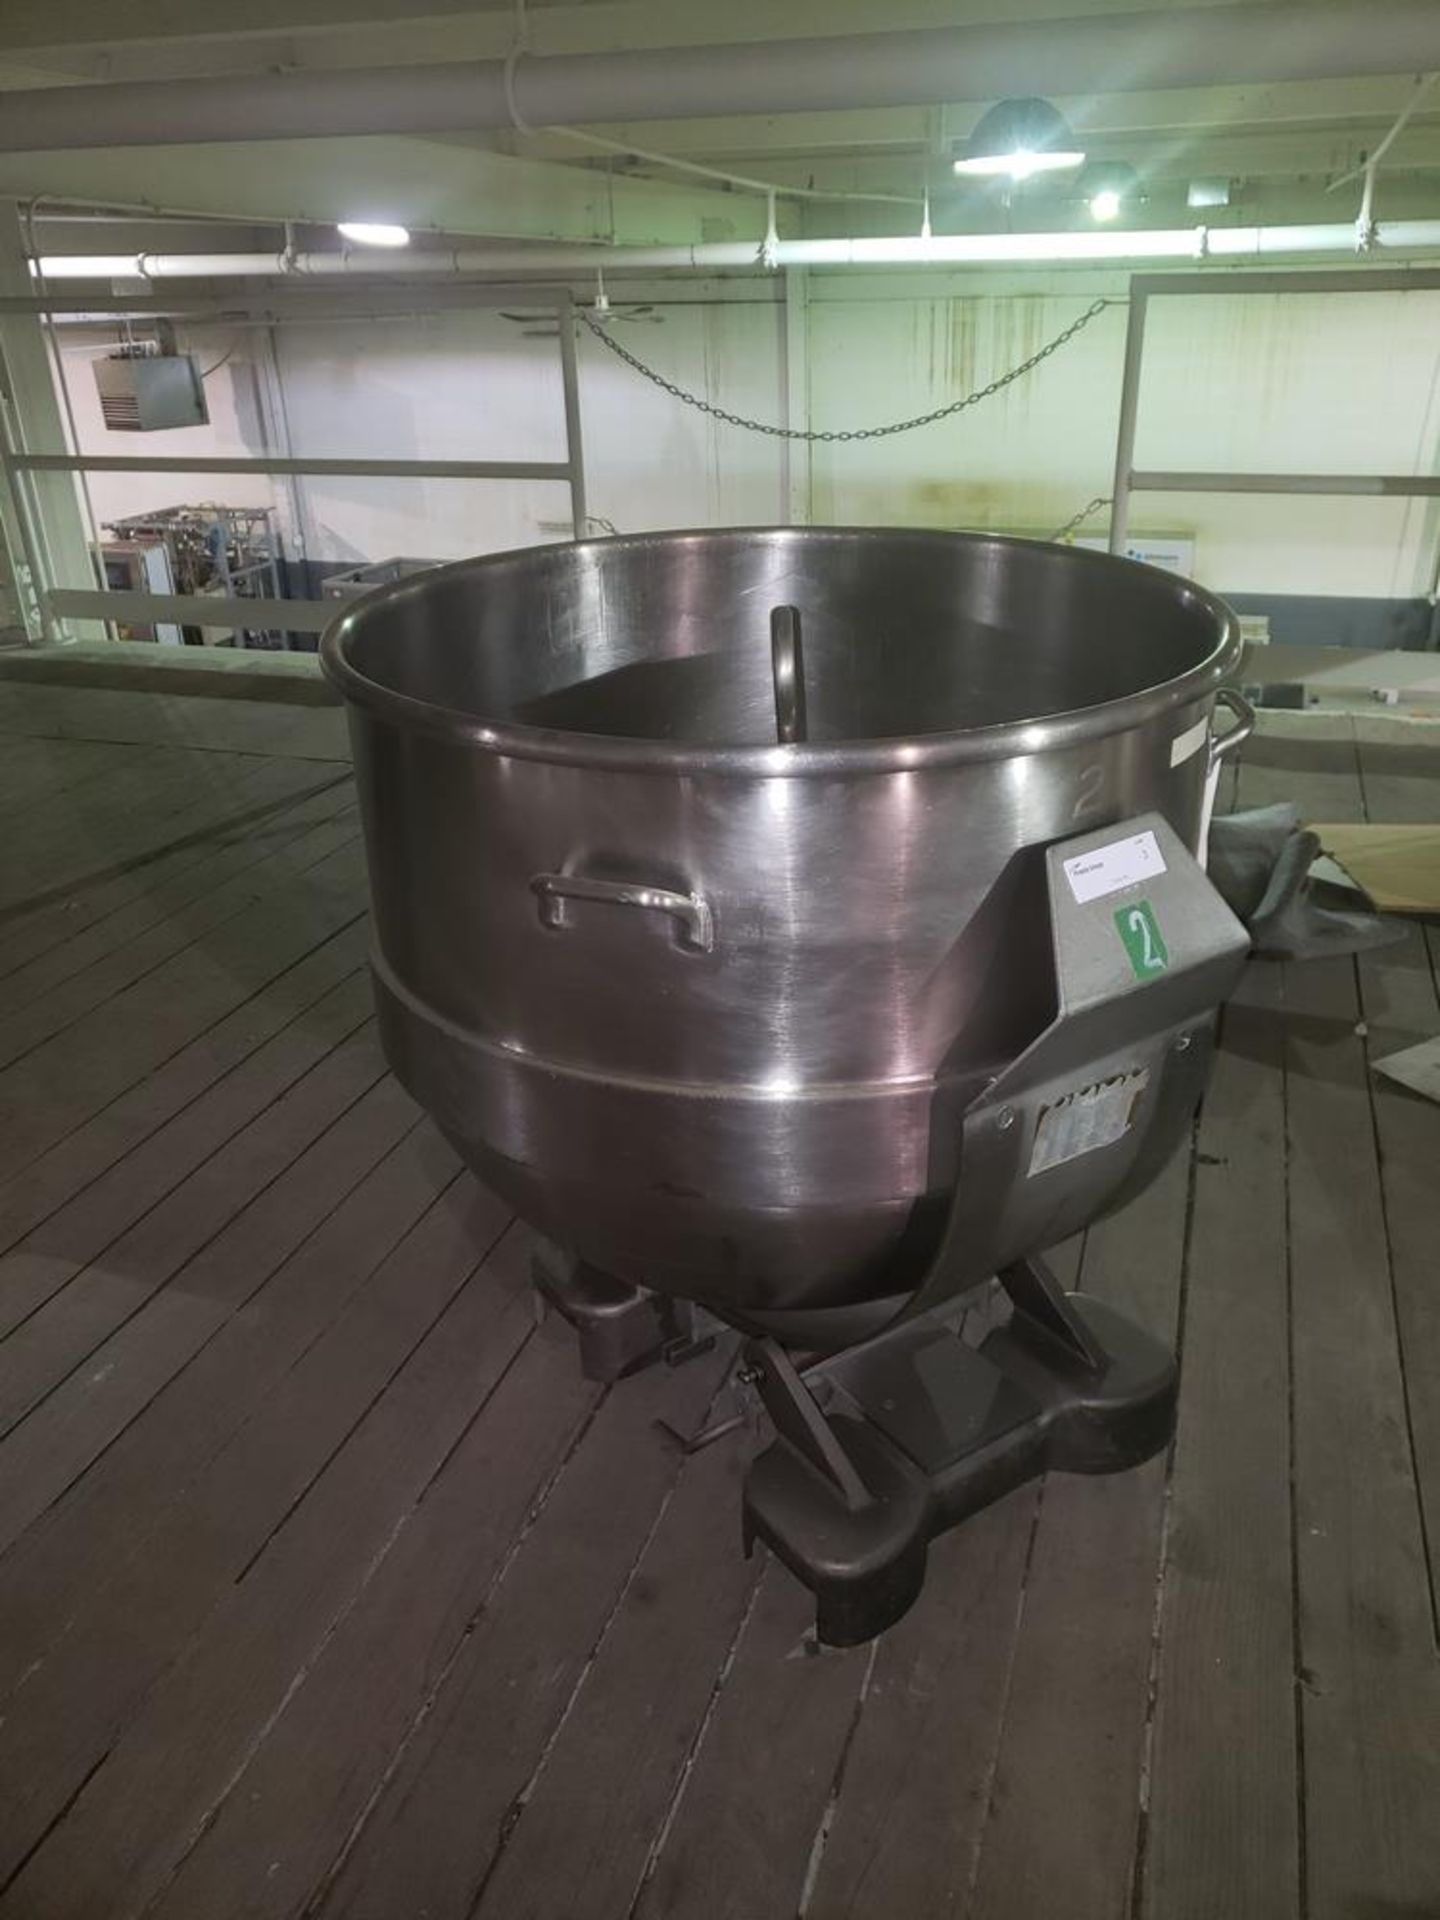 S/S mixing bowl for AMF Mixer